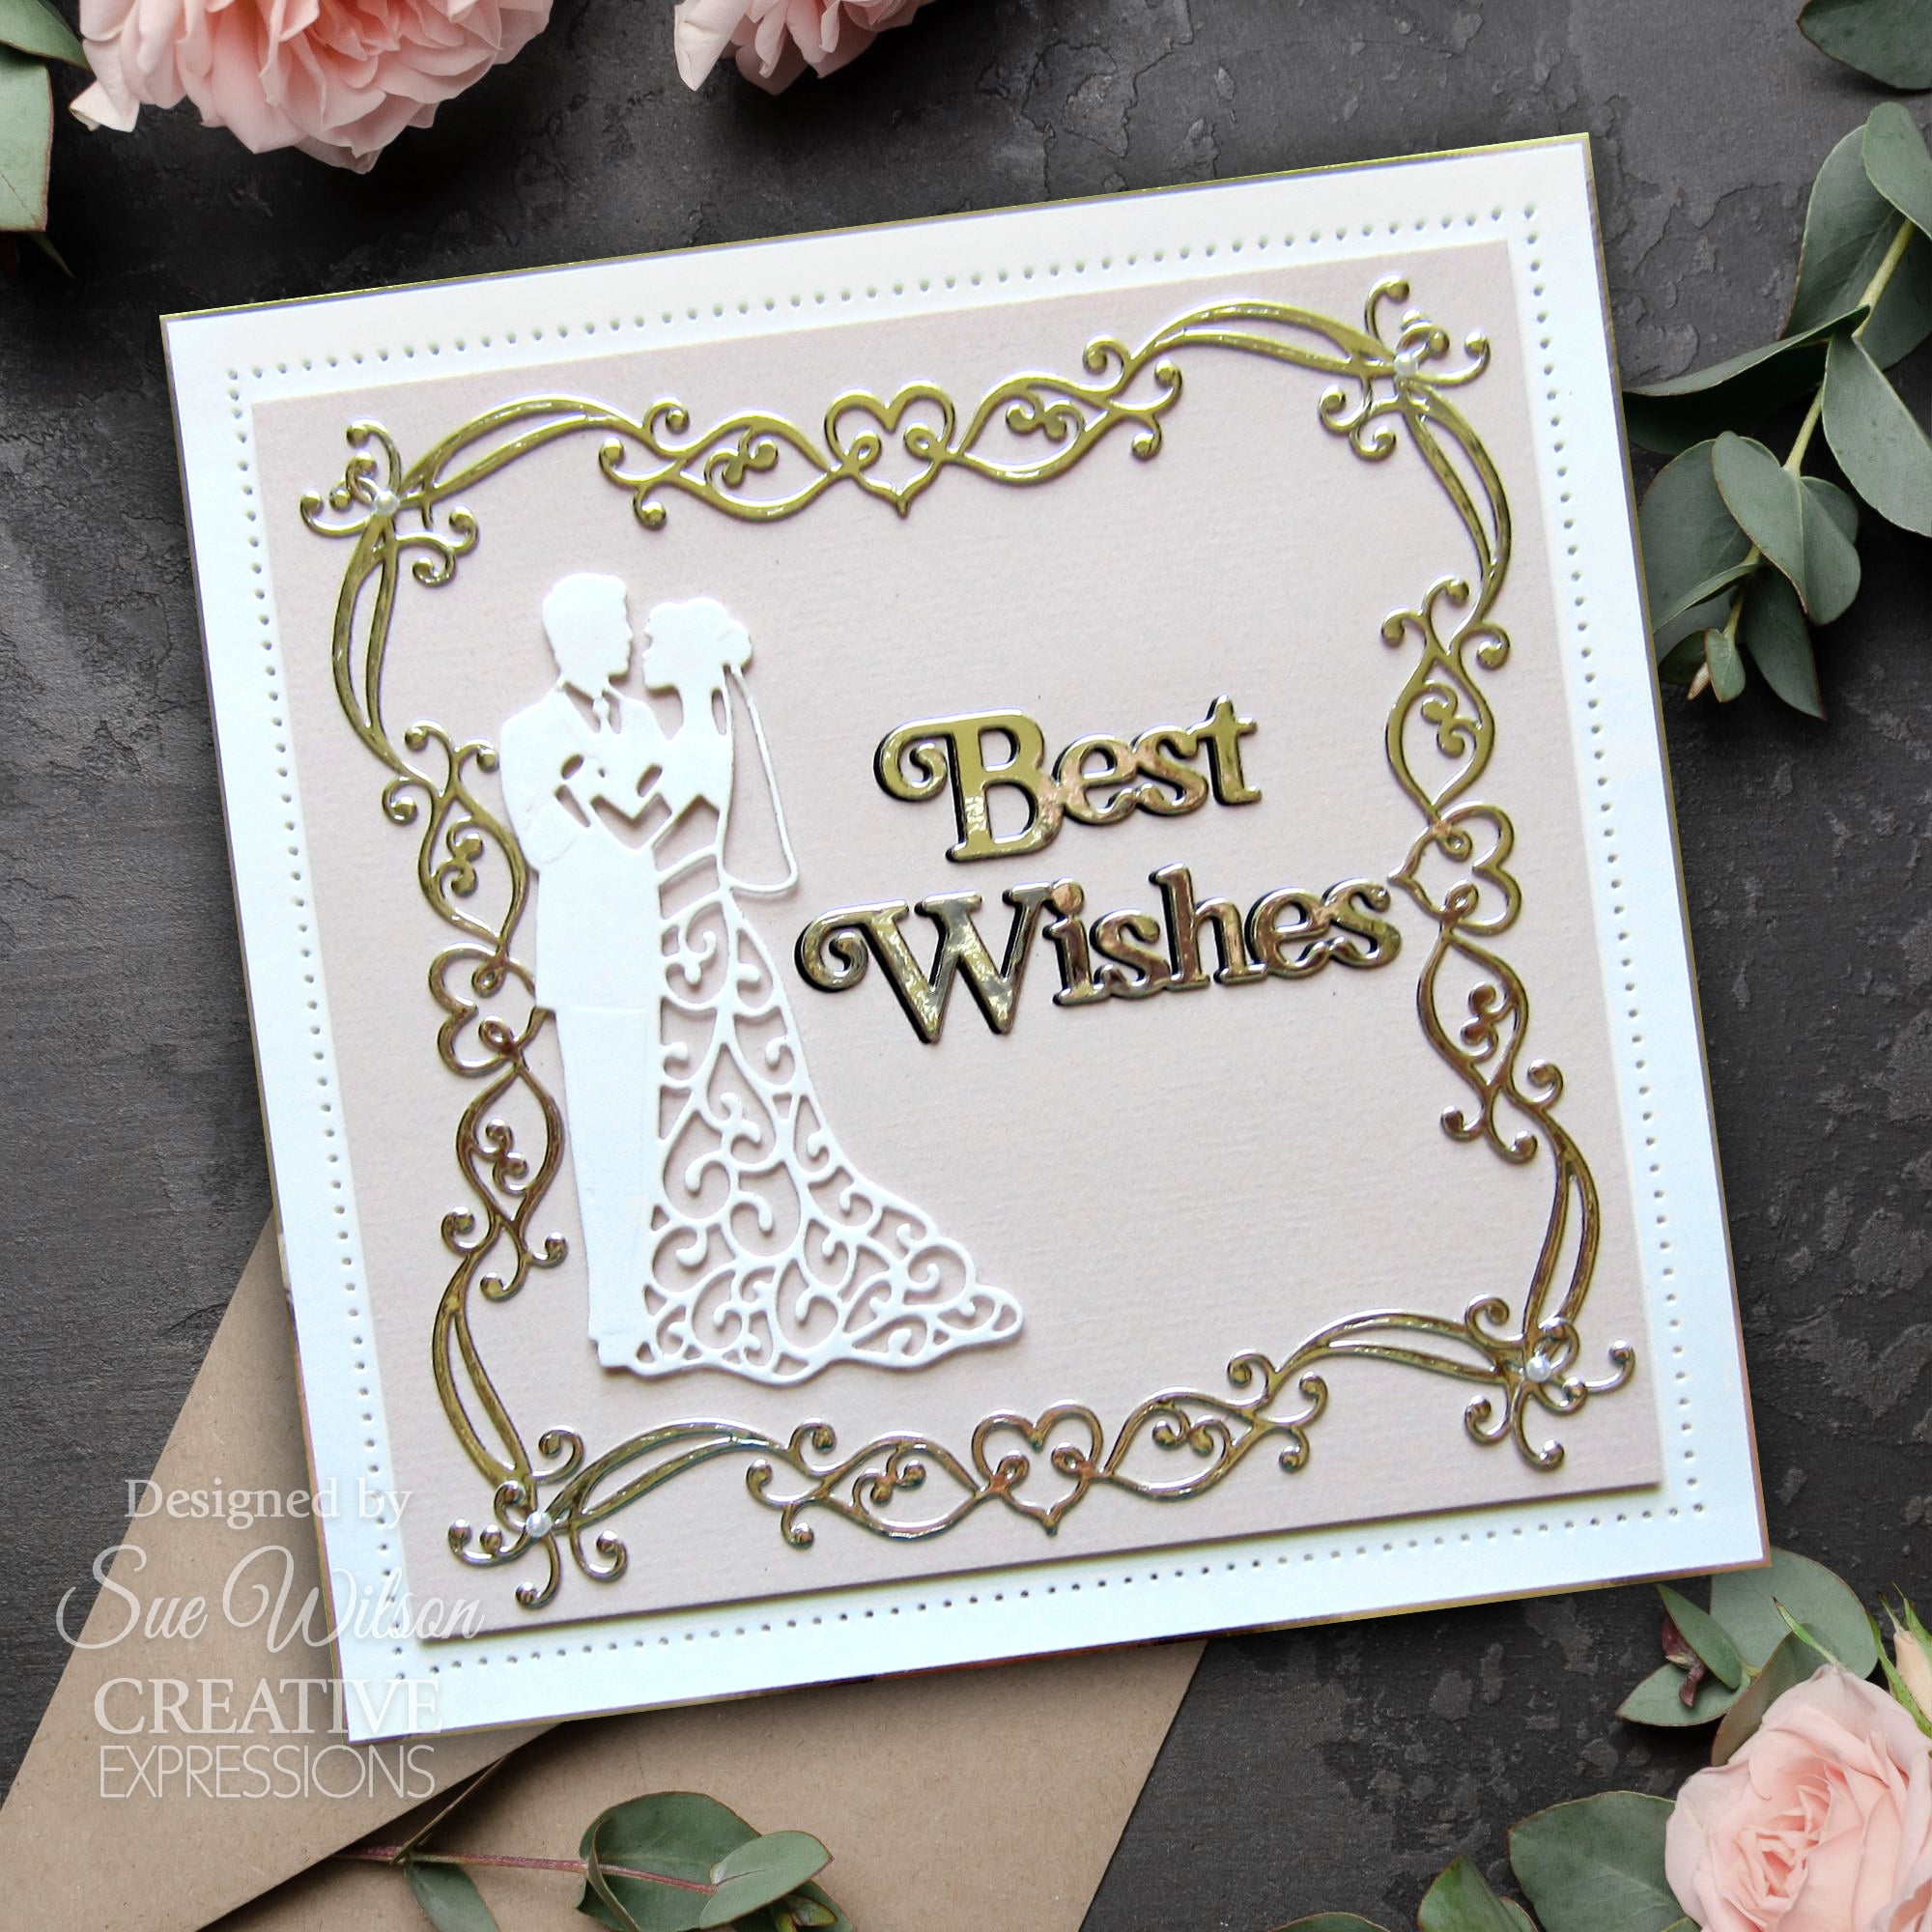 Creative Expressions Sue Wilson Border Collection Heart Scroll Craft Die